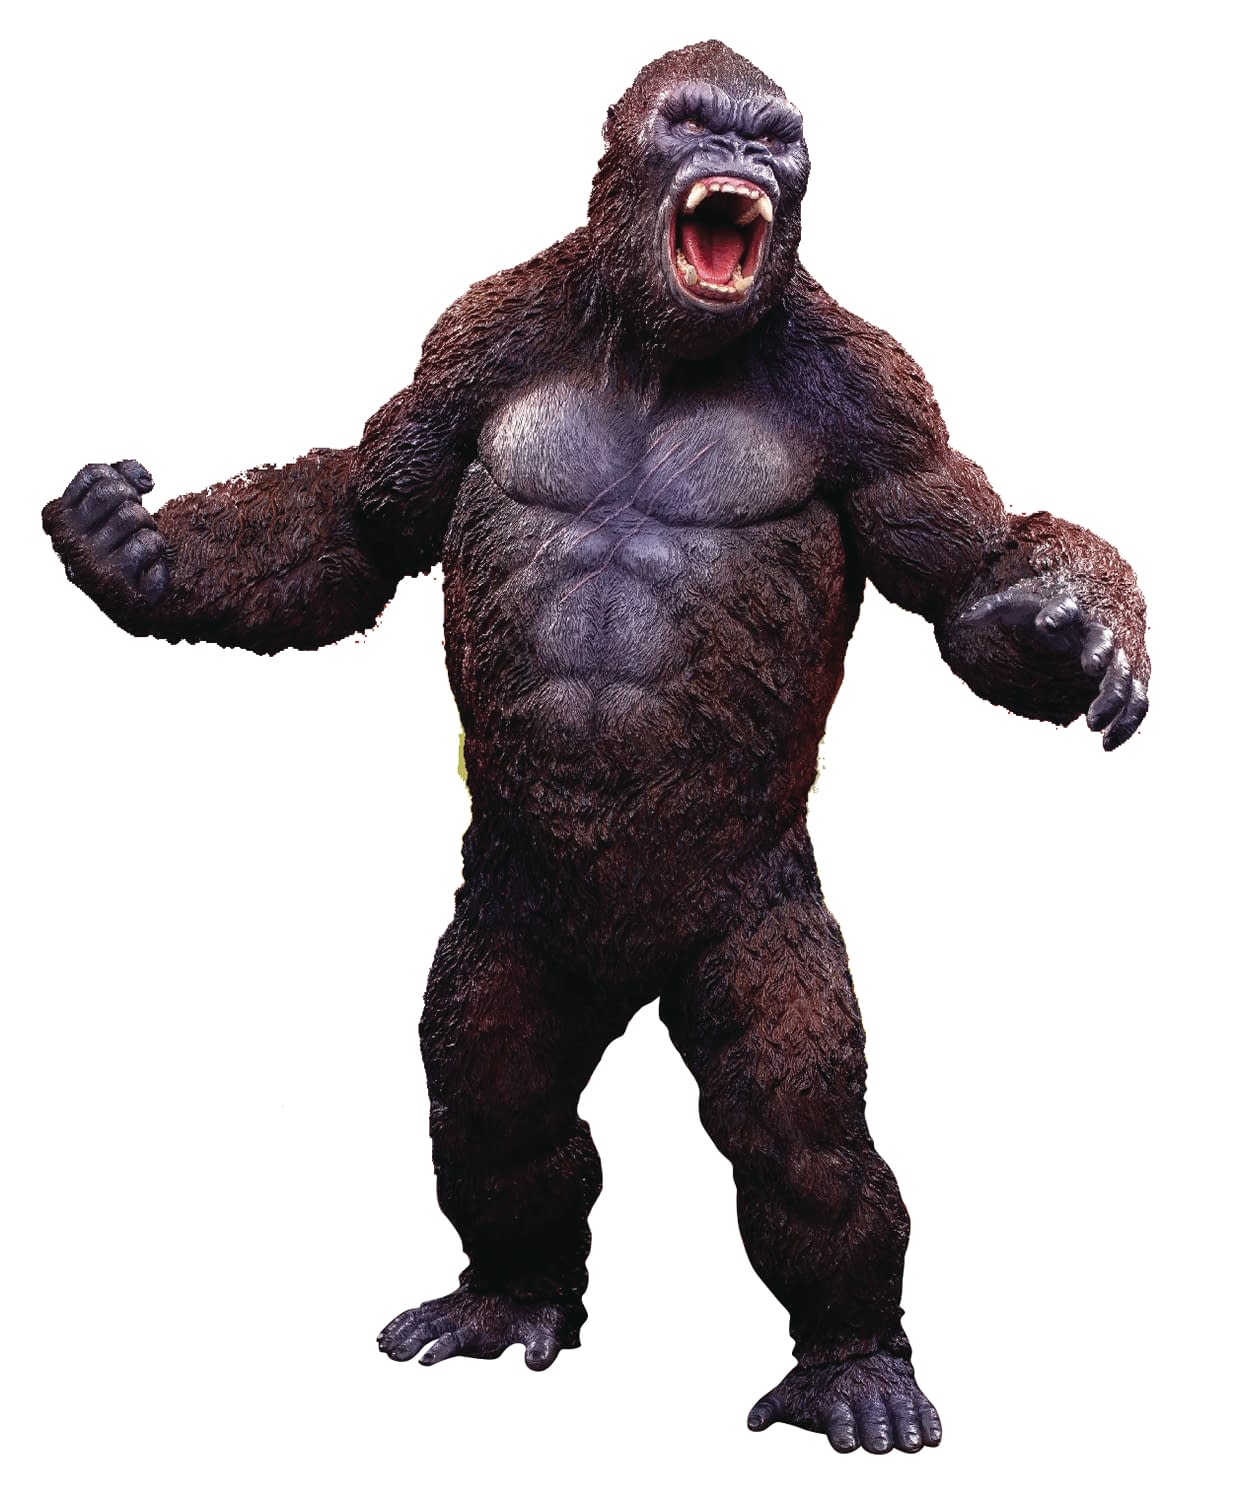 King Kong Stands his Ground with New Star Ace Toys Statue 